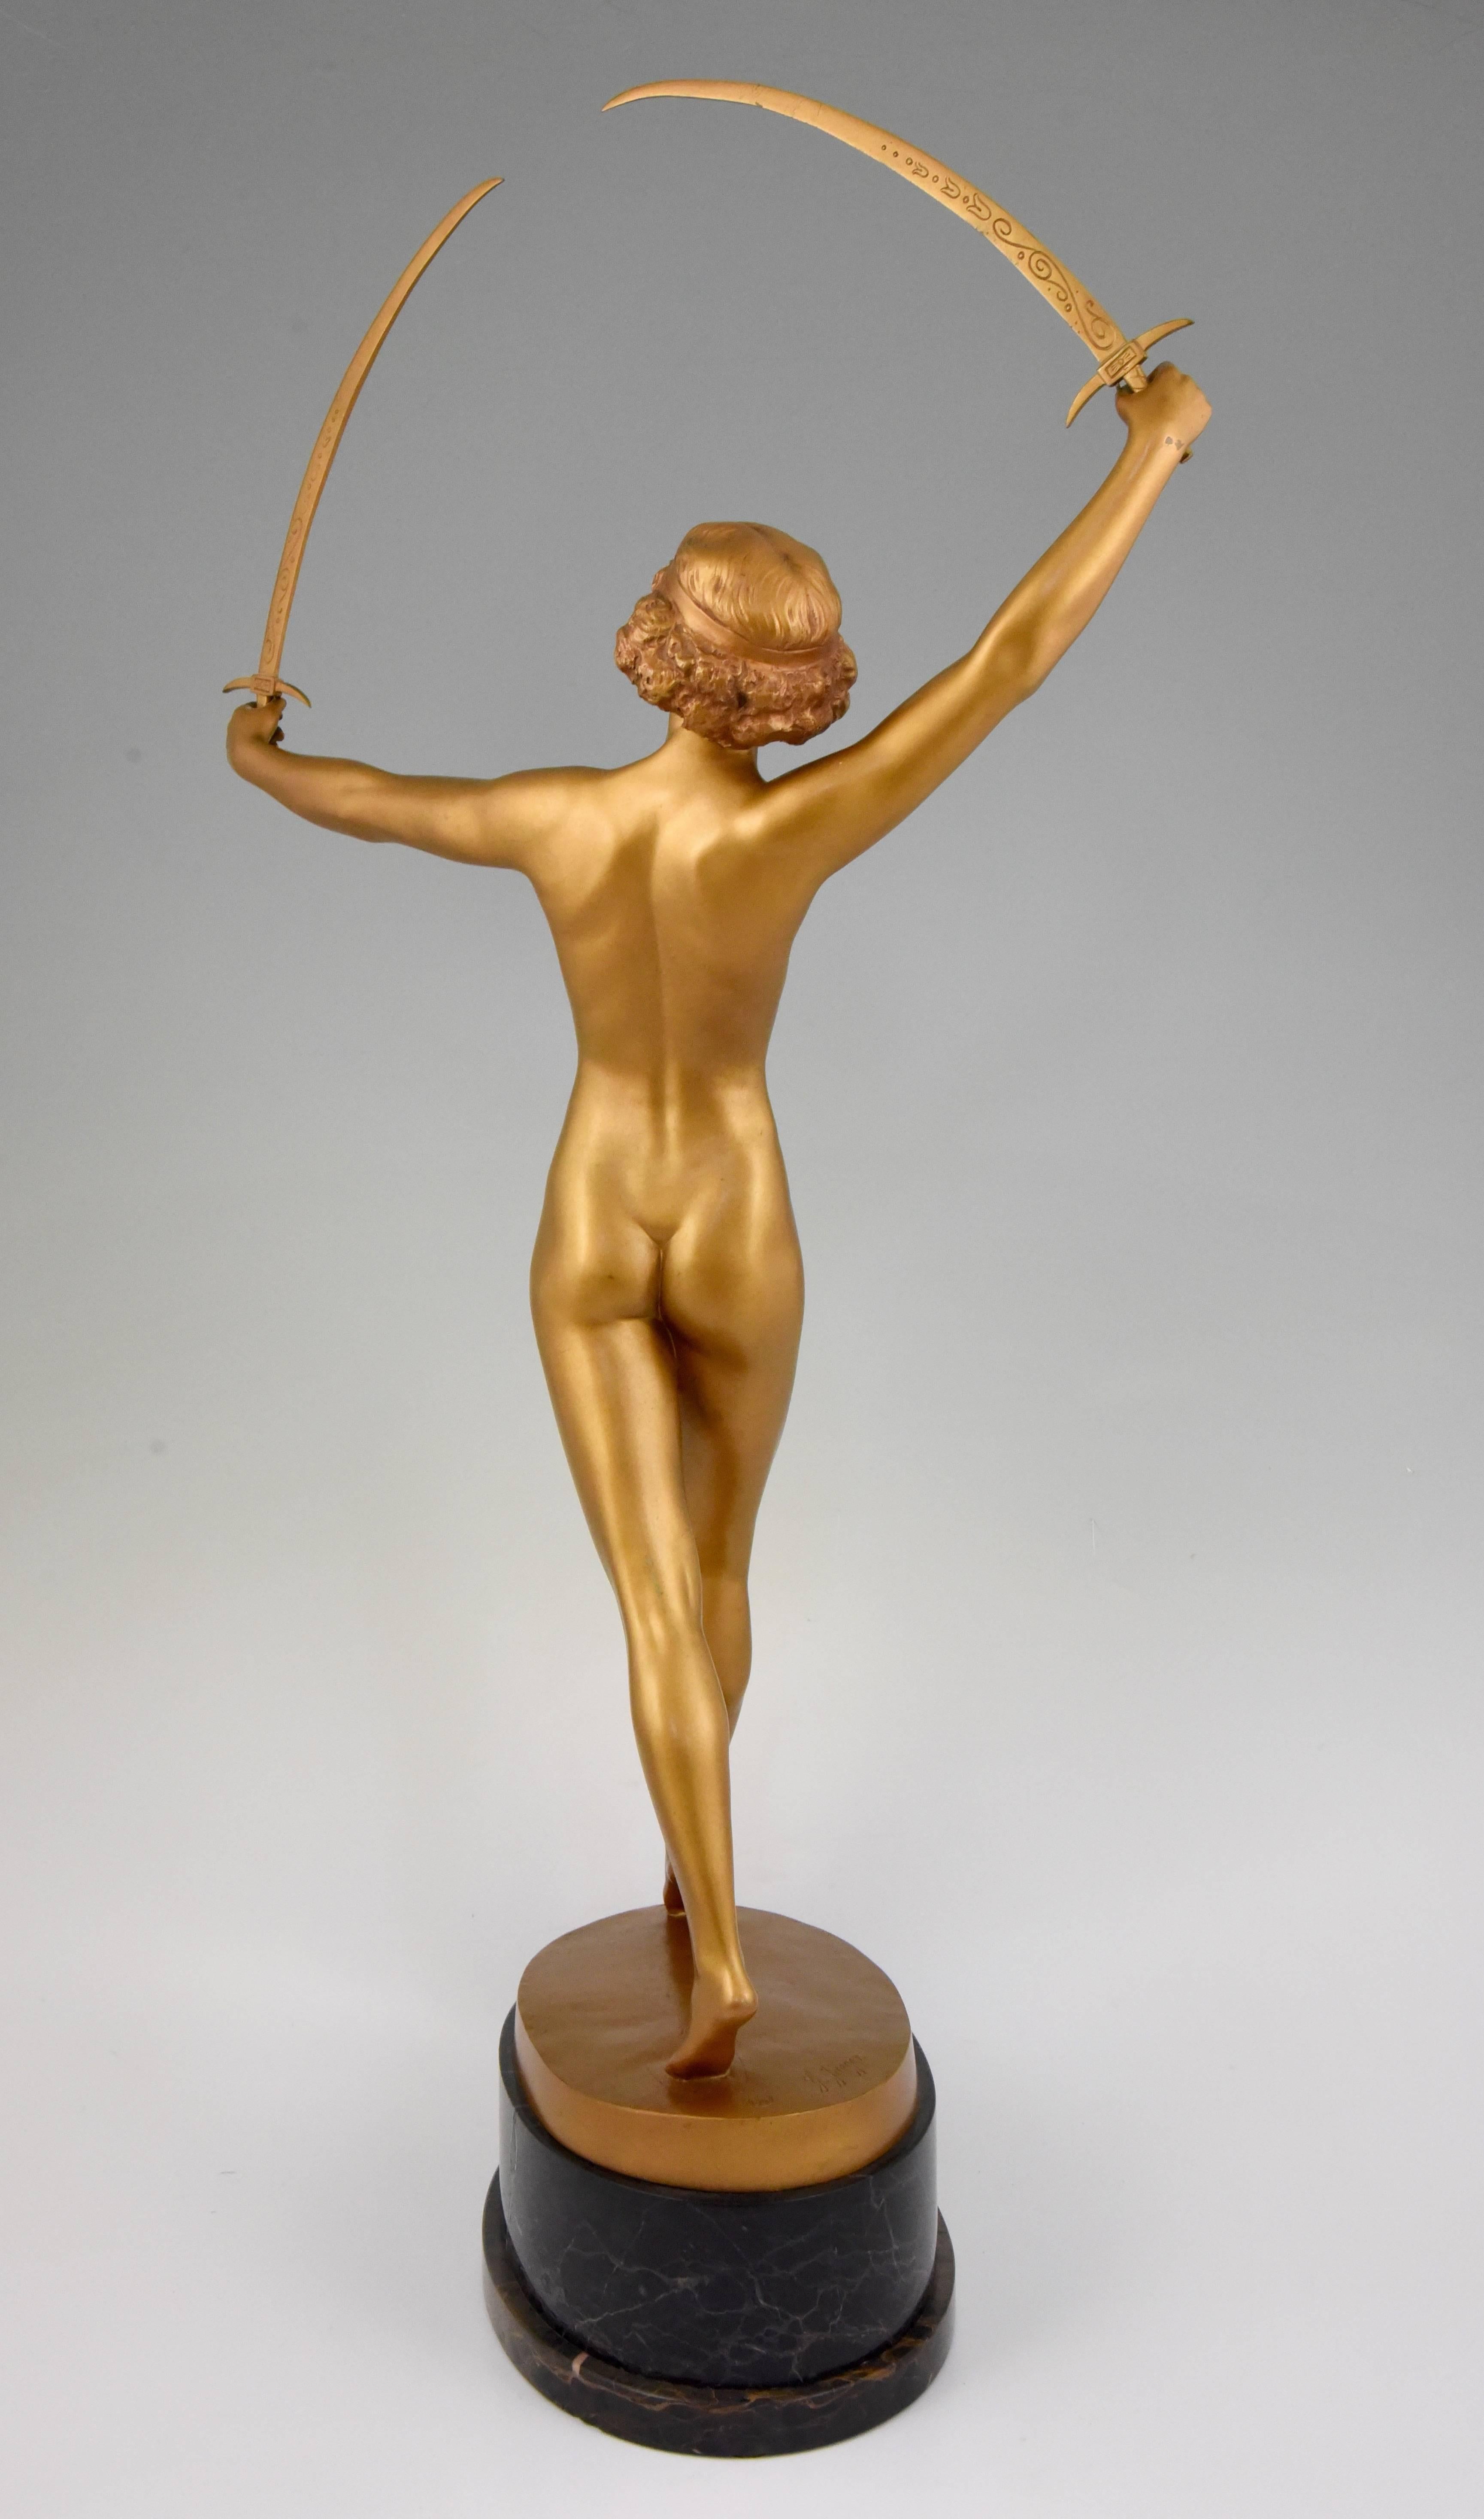 20th Century Art Deco Gilt Bronze Sculpture of a Nude with Two Swords by Gotthilf Jaeger